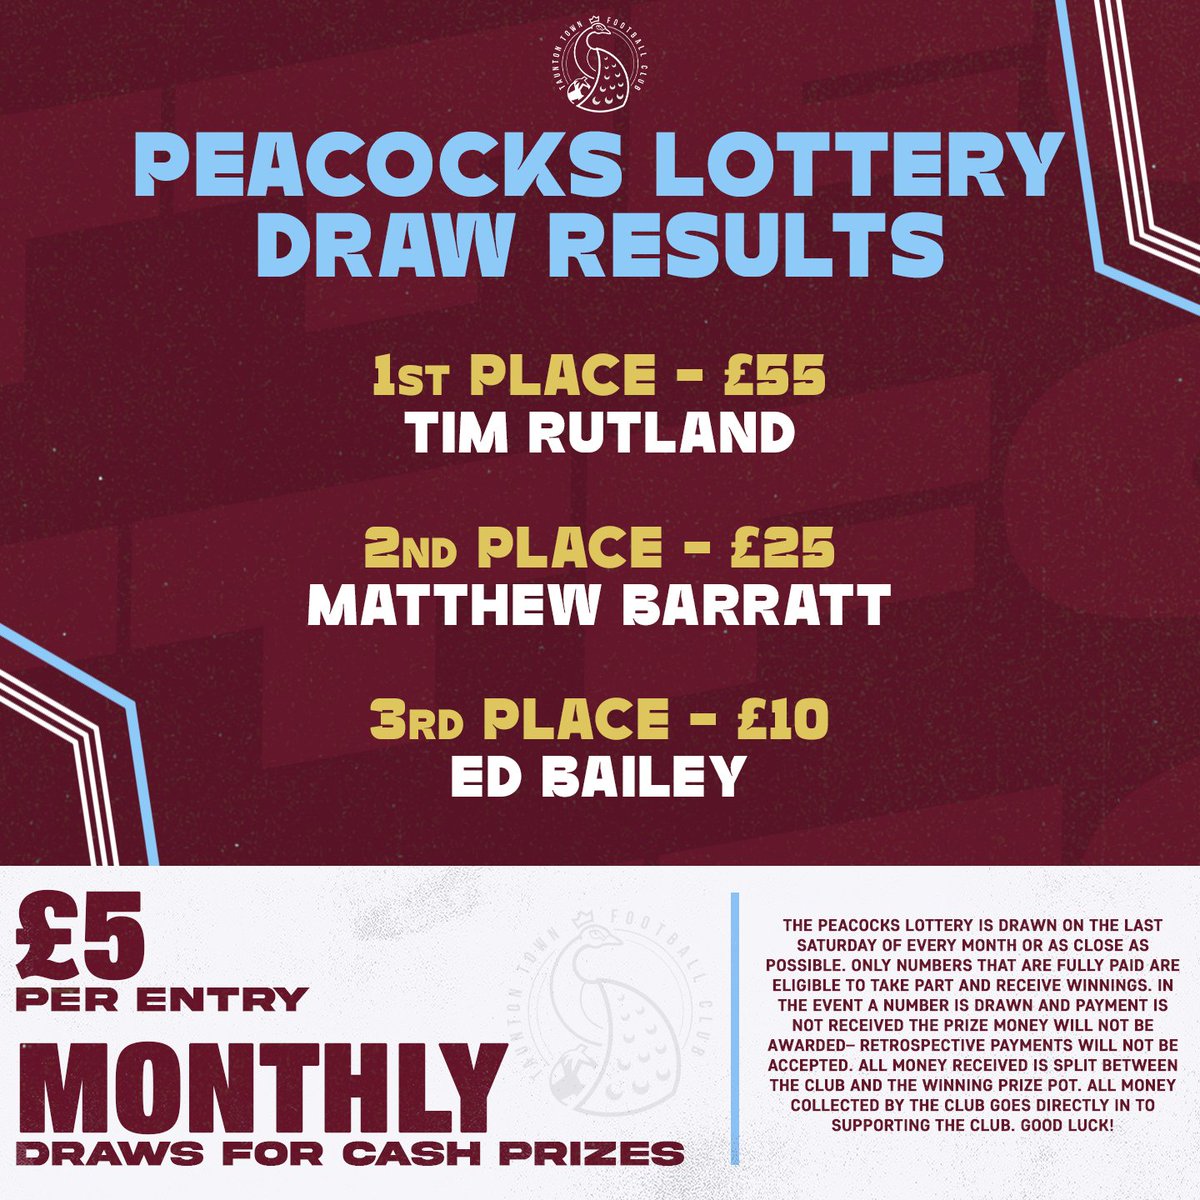 𝗔𝗽𝗿𝗶𝗹 𝗣𝗲𝗮𝗰𝗼𝗰𝗸𝘀 𝗟𝗼𝘁𝘁𝗲𝗿𝘆 𝗥𝗲𝘀𝘂𝗹𝘁𝘀 🎰 1st💰 £55 - 1️⃣5️⃣ Tim Rutland 2nd💰£25 - 1️⃣7️⃣ Matthew Barratt 3rd 💰£10 - 2️⃣ Ed Bailey Thank you to everyone who entered this month, if you would like to enter next month's draw details are in the link below 👇 ▶️…